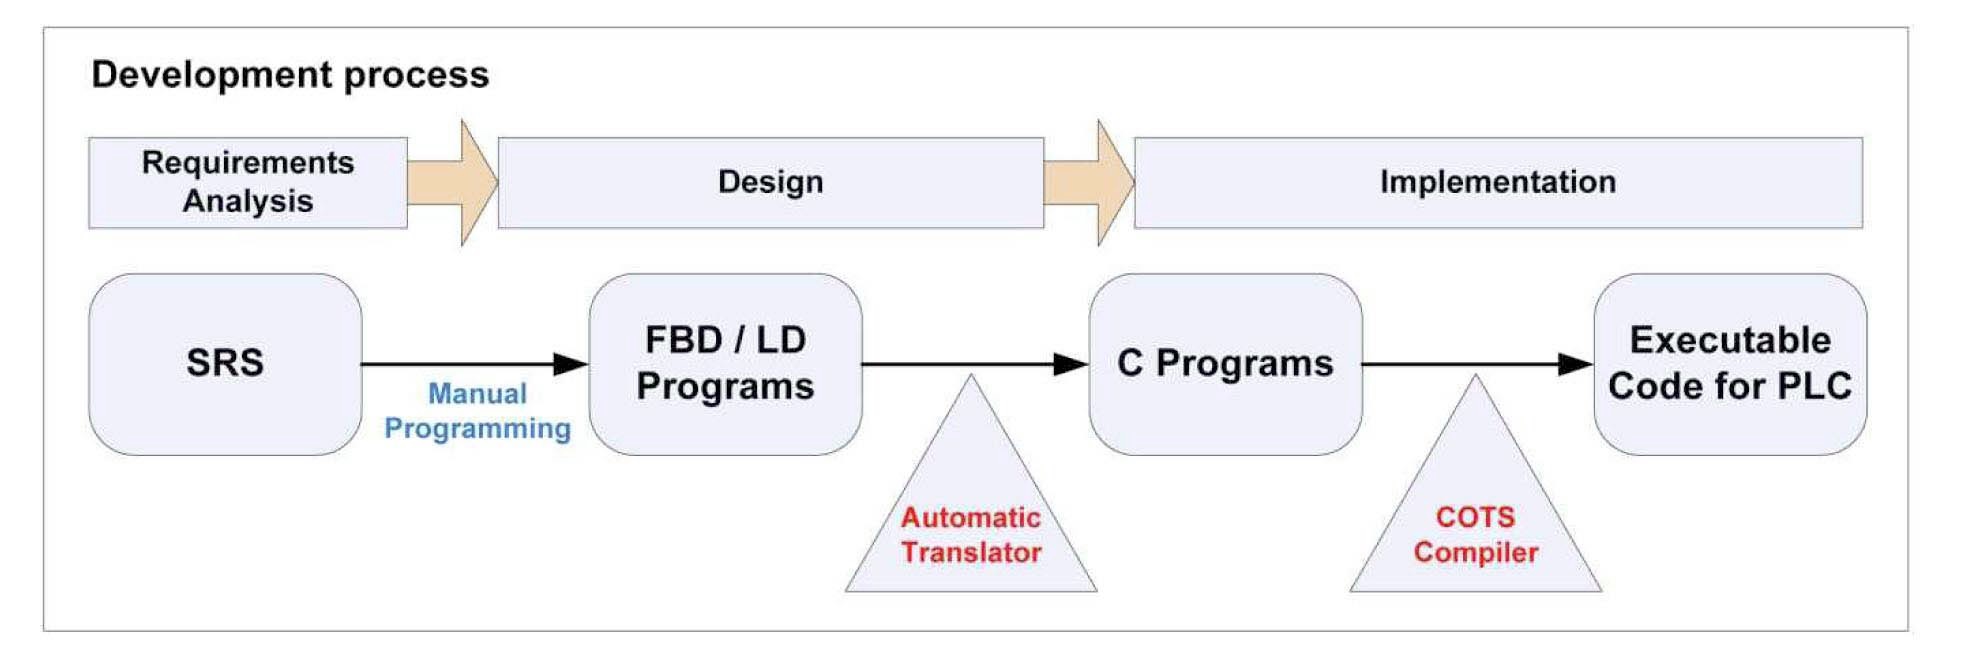 A Typical RPS Software Development Process using PLCs